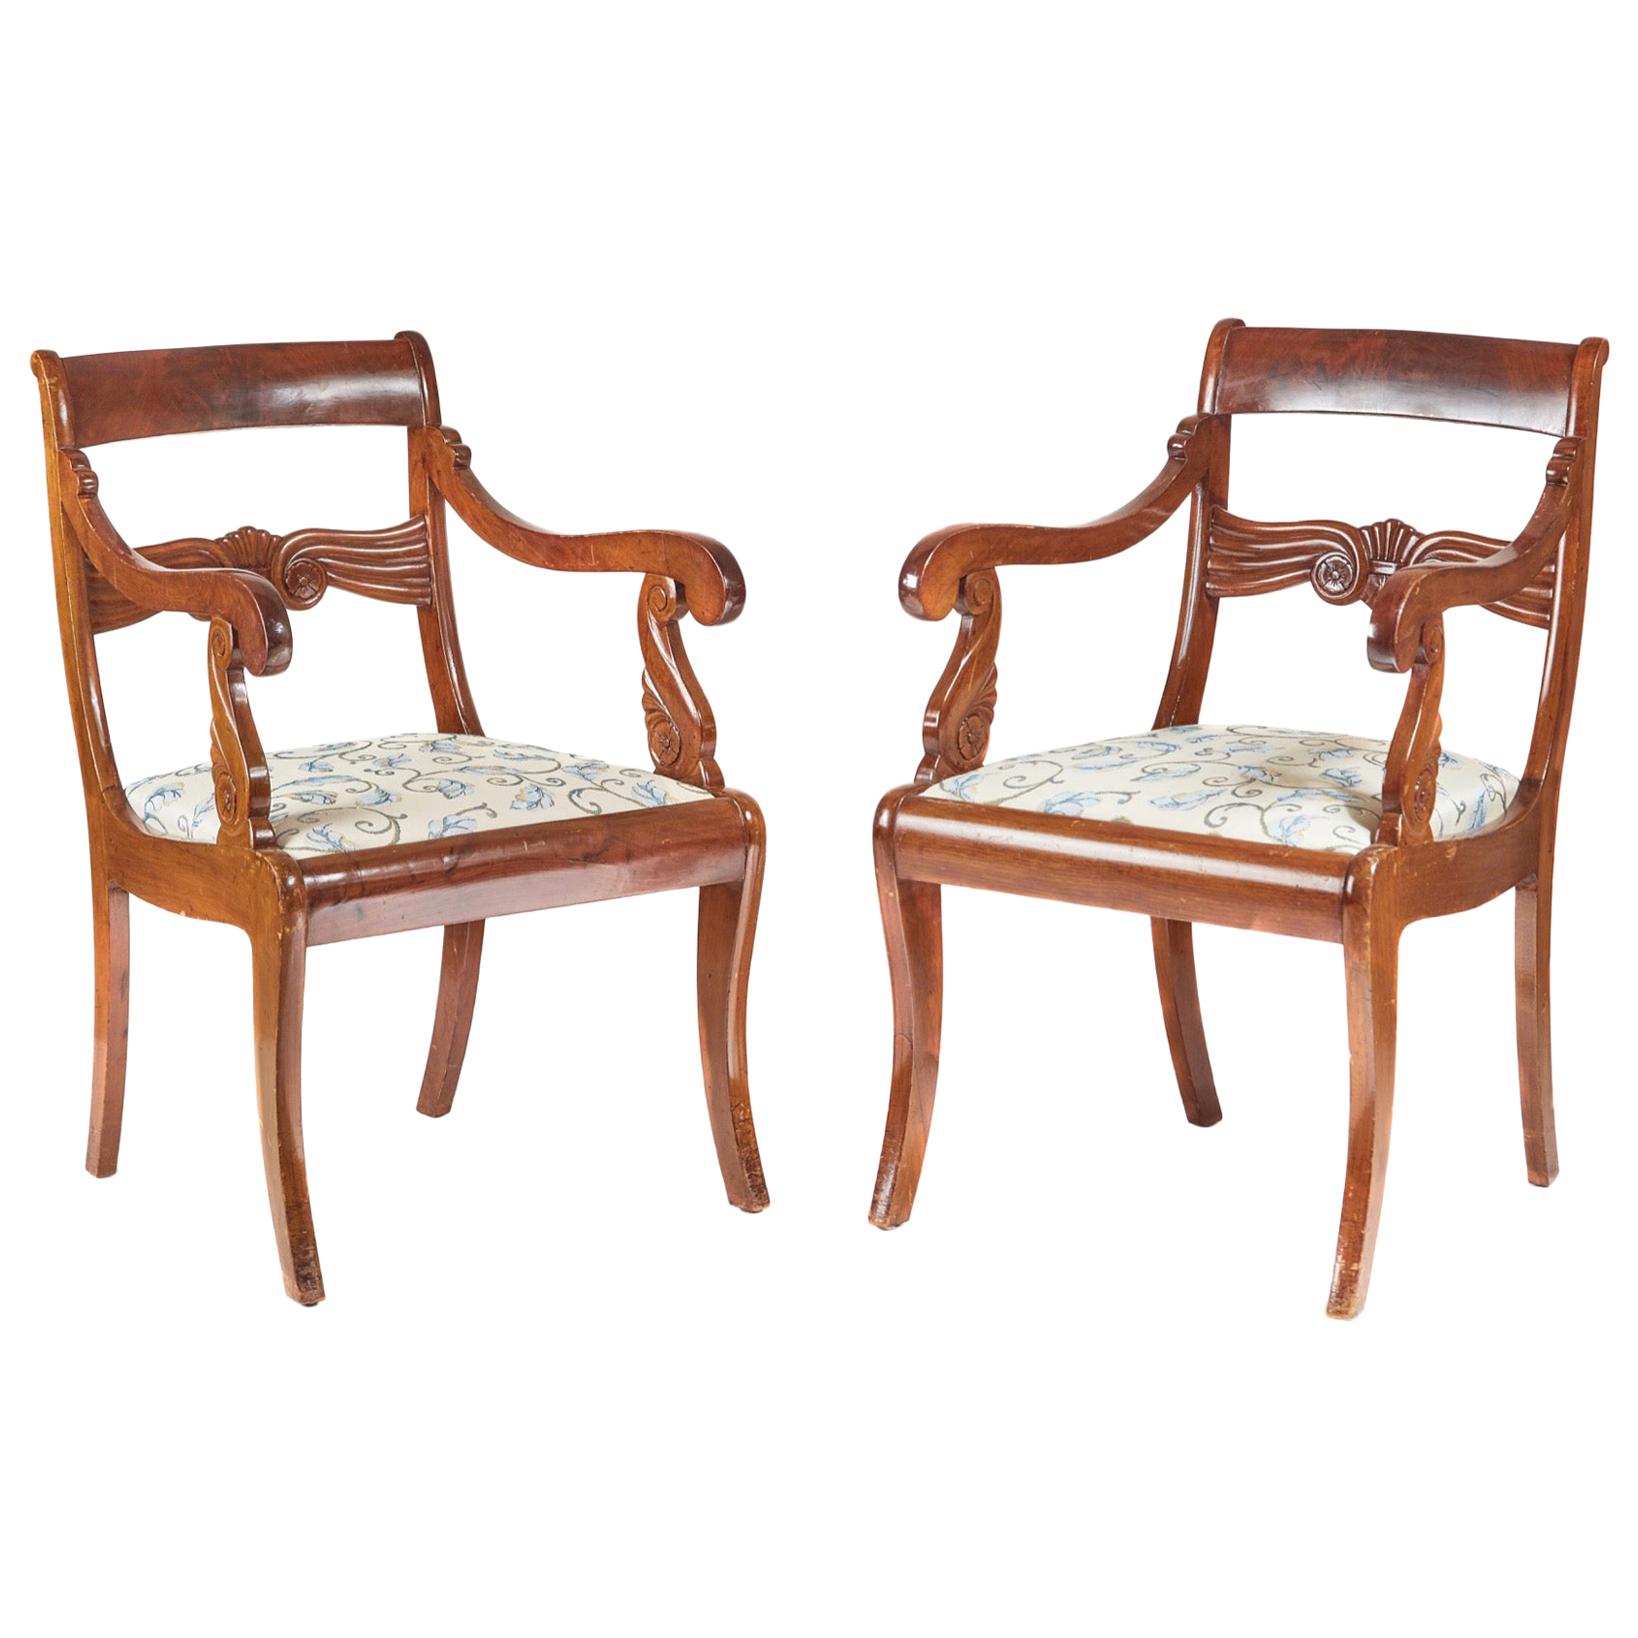 Antique Pair of French Mahogany Carver Chairs, circa 1880 For Sale